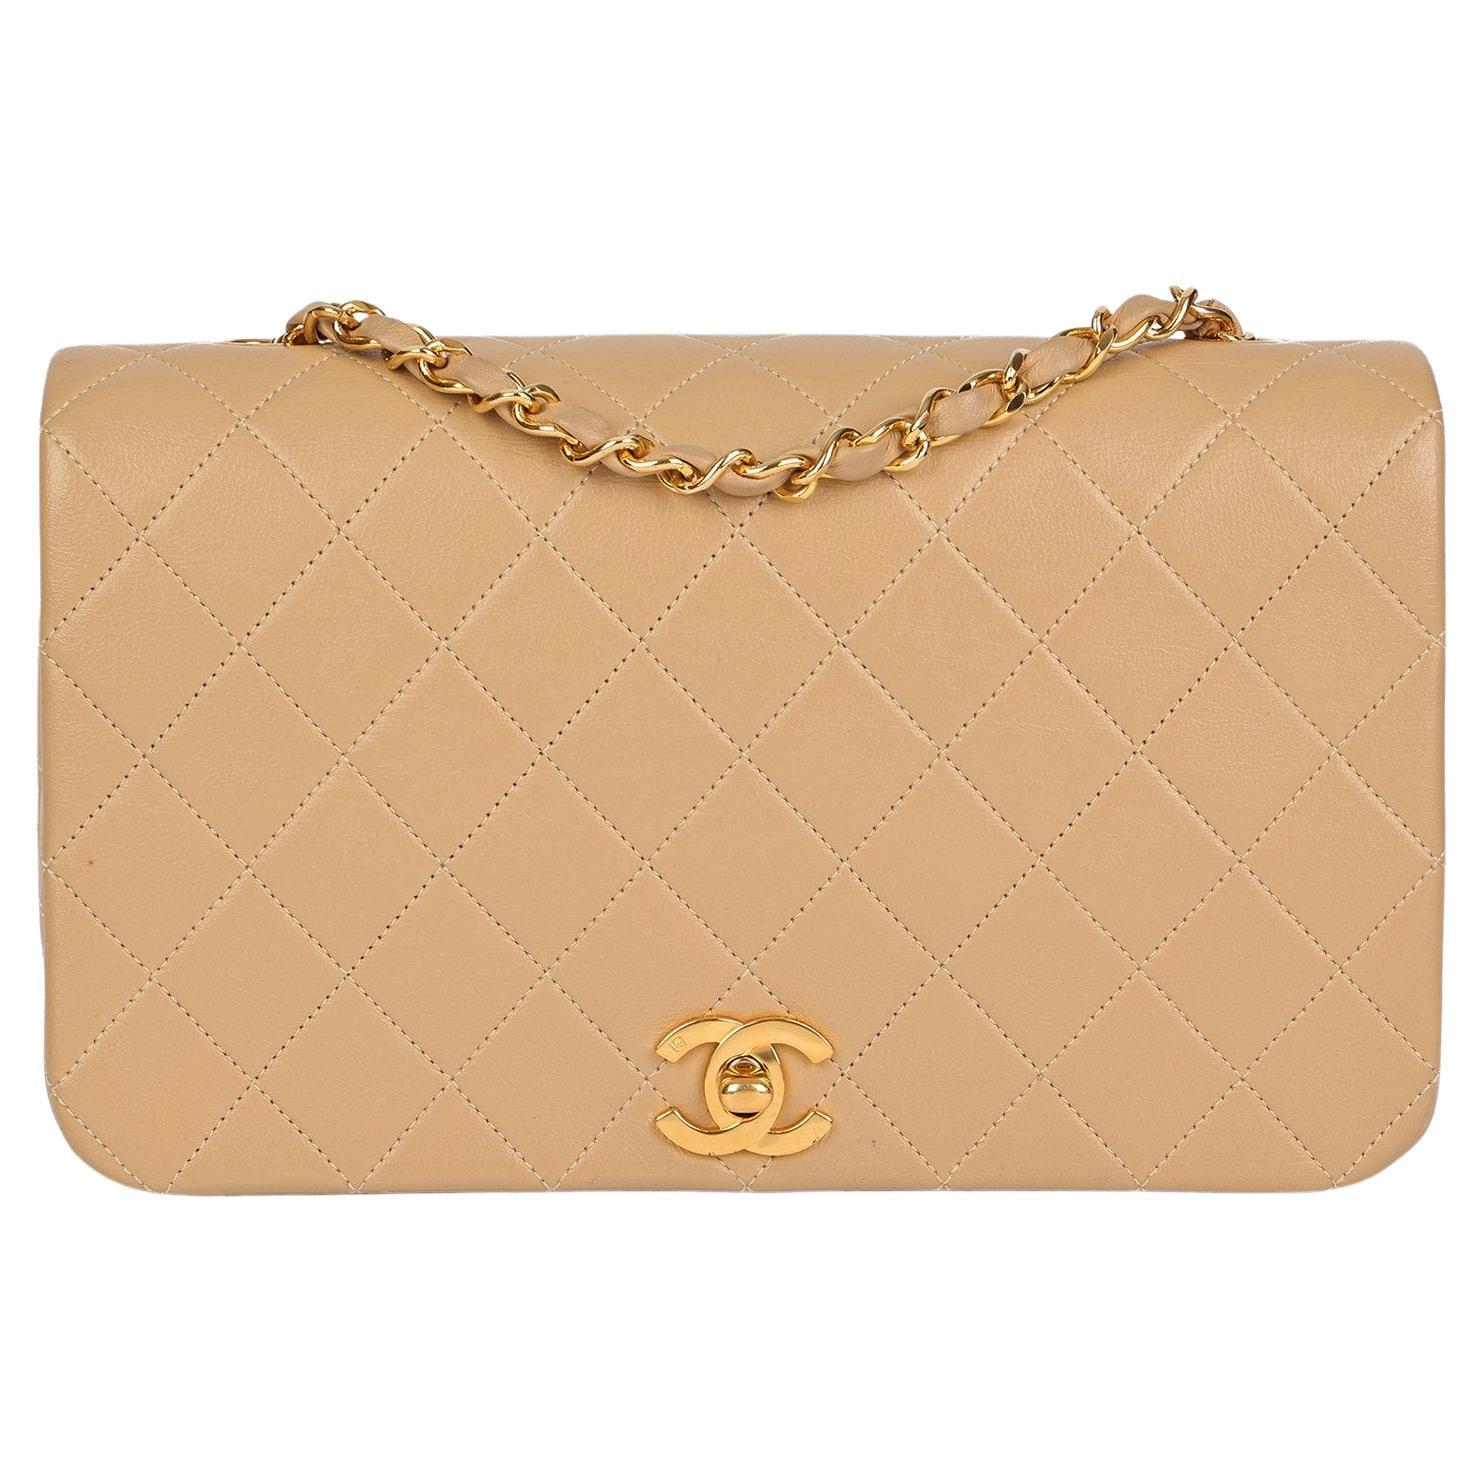 CHANEL Beige Quilted Lambskin Vintage Small Classic Single Full Flap Bag